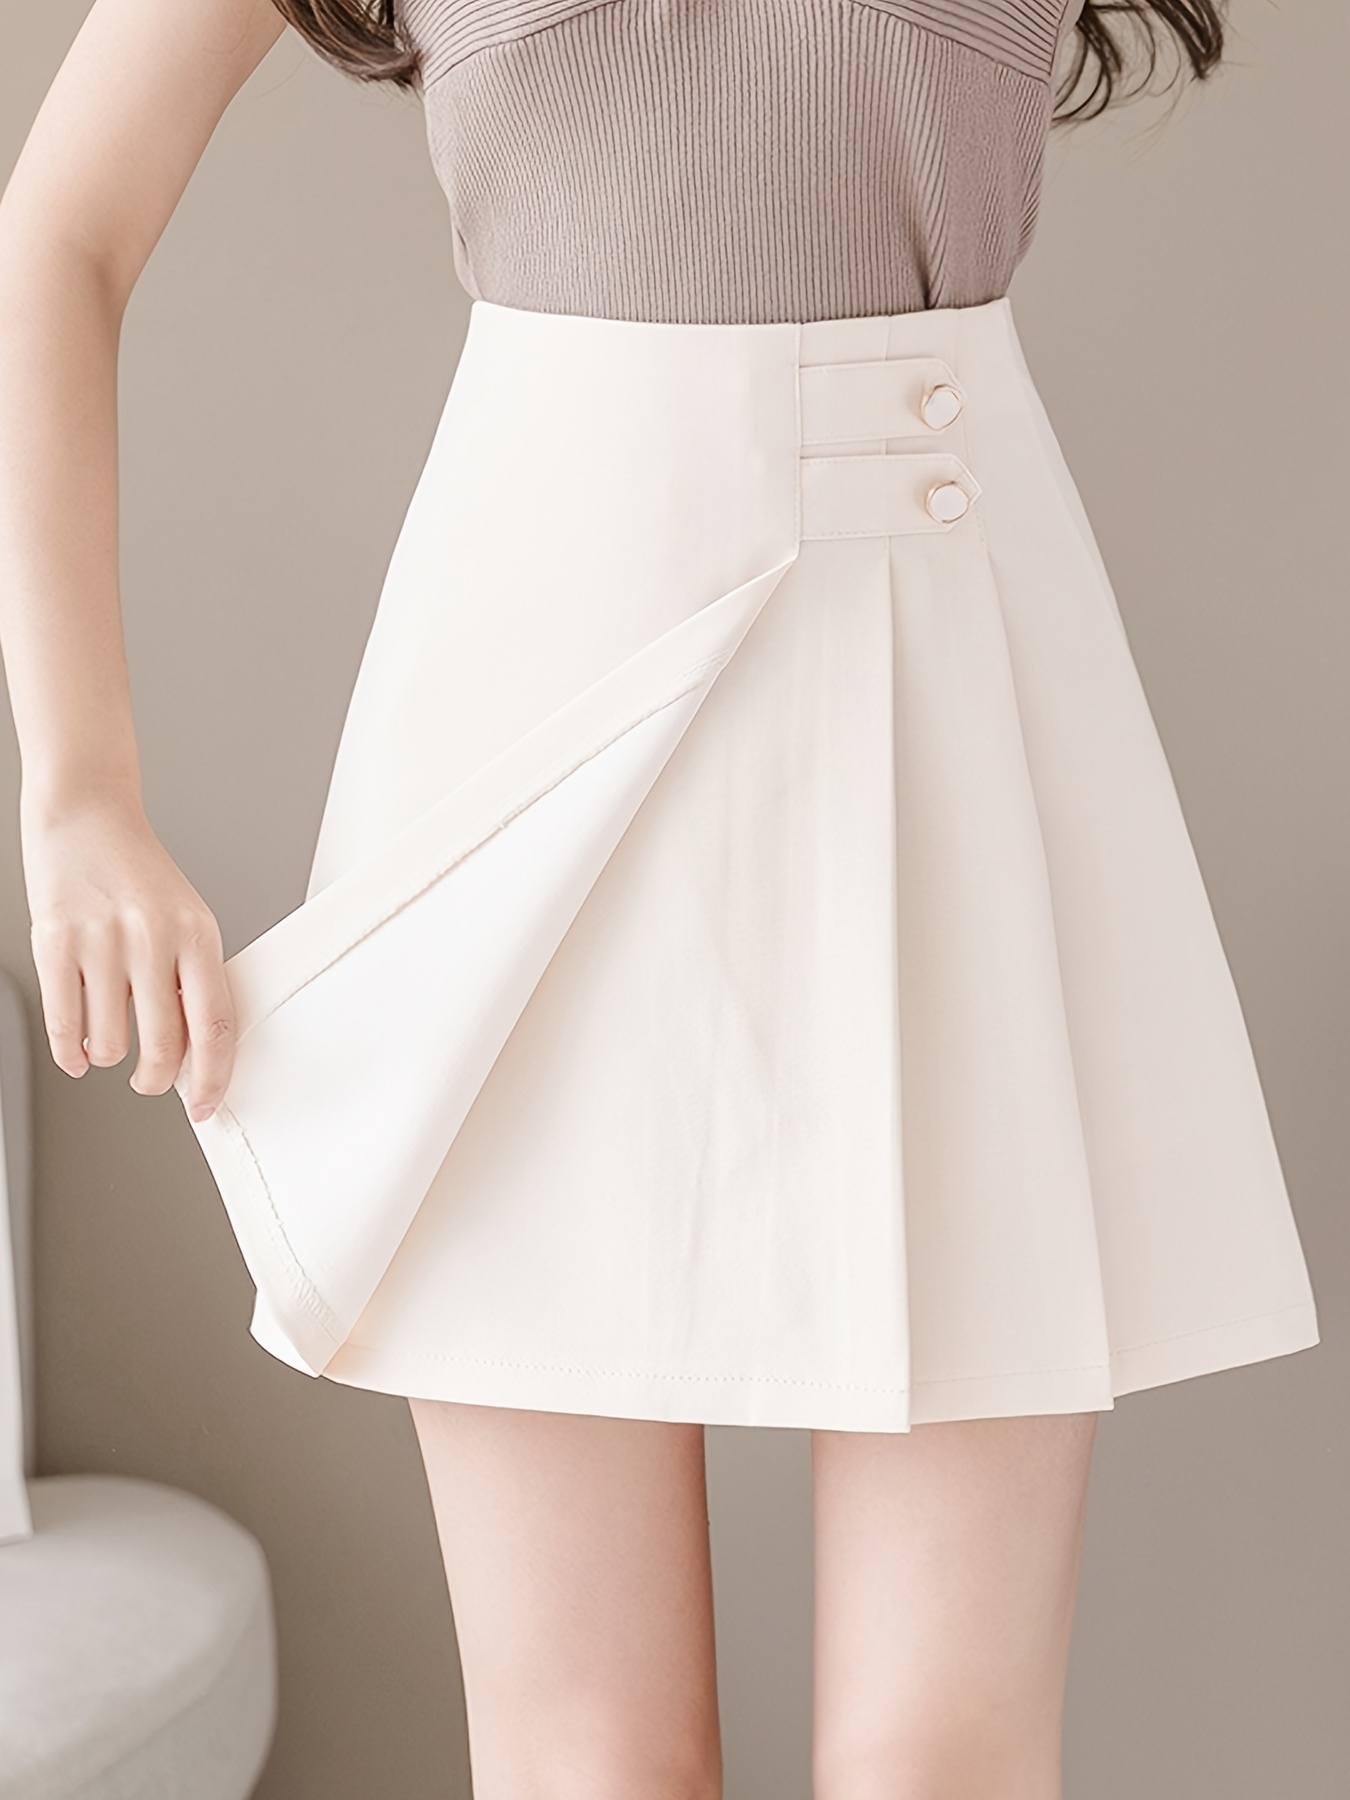 Preppy Asymmetrical Pleated Hem Skirt, Casual Solid Every Day Skirt,  Women's Clothing